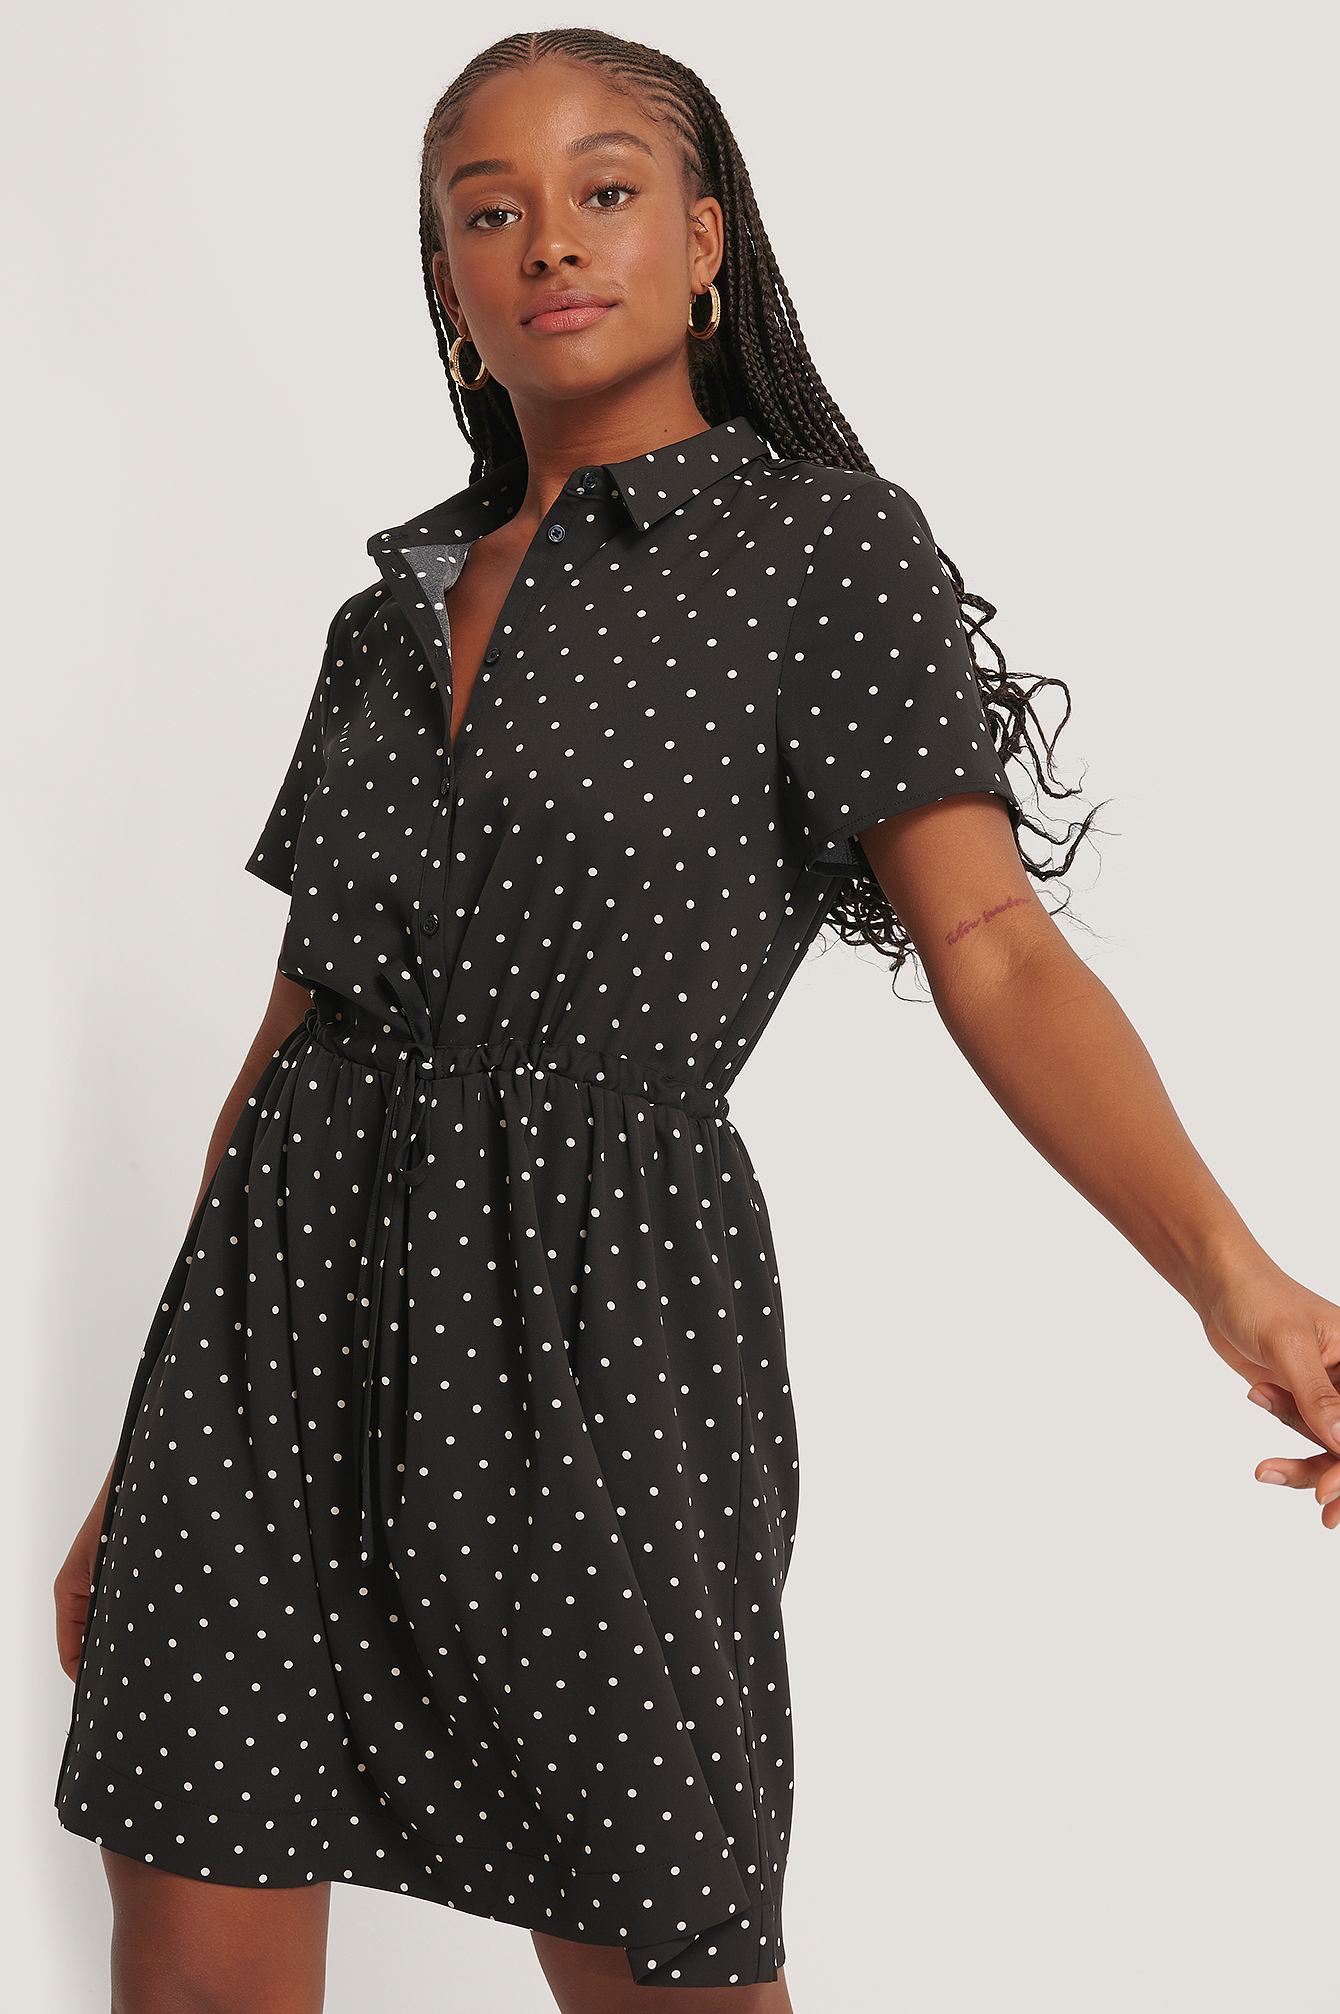 Black/White dots Dotted Collar Dress